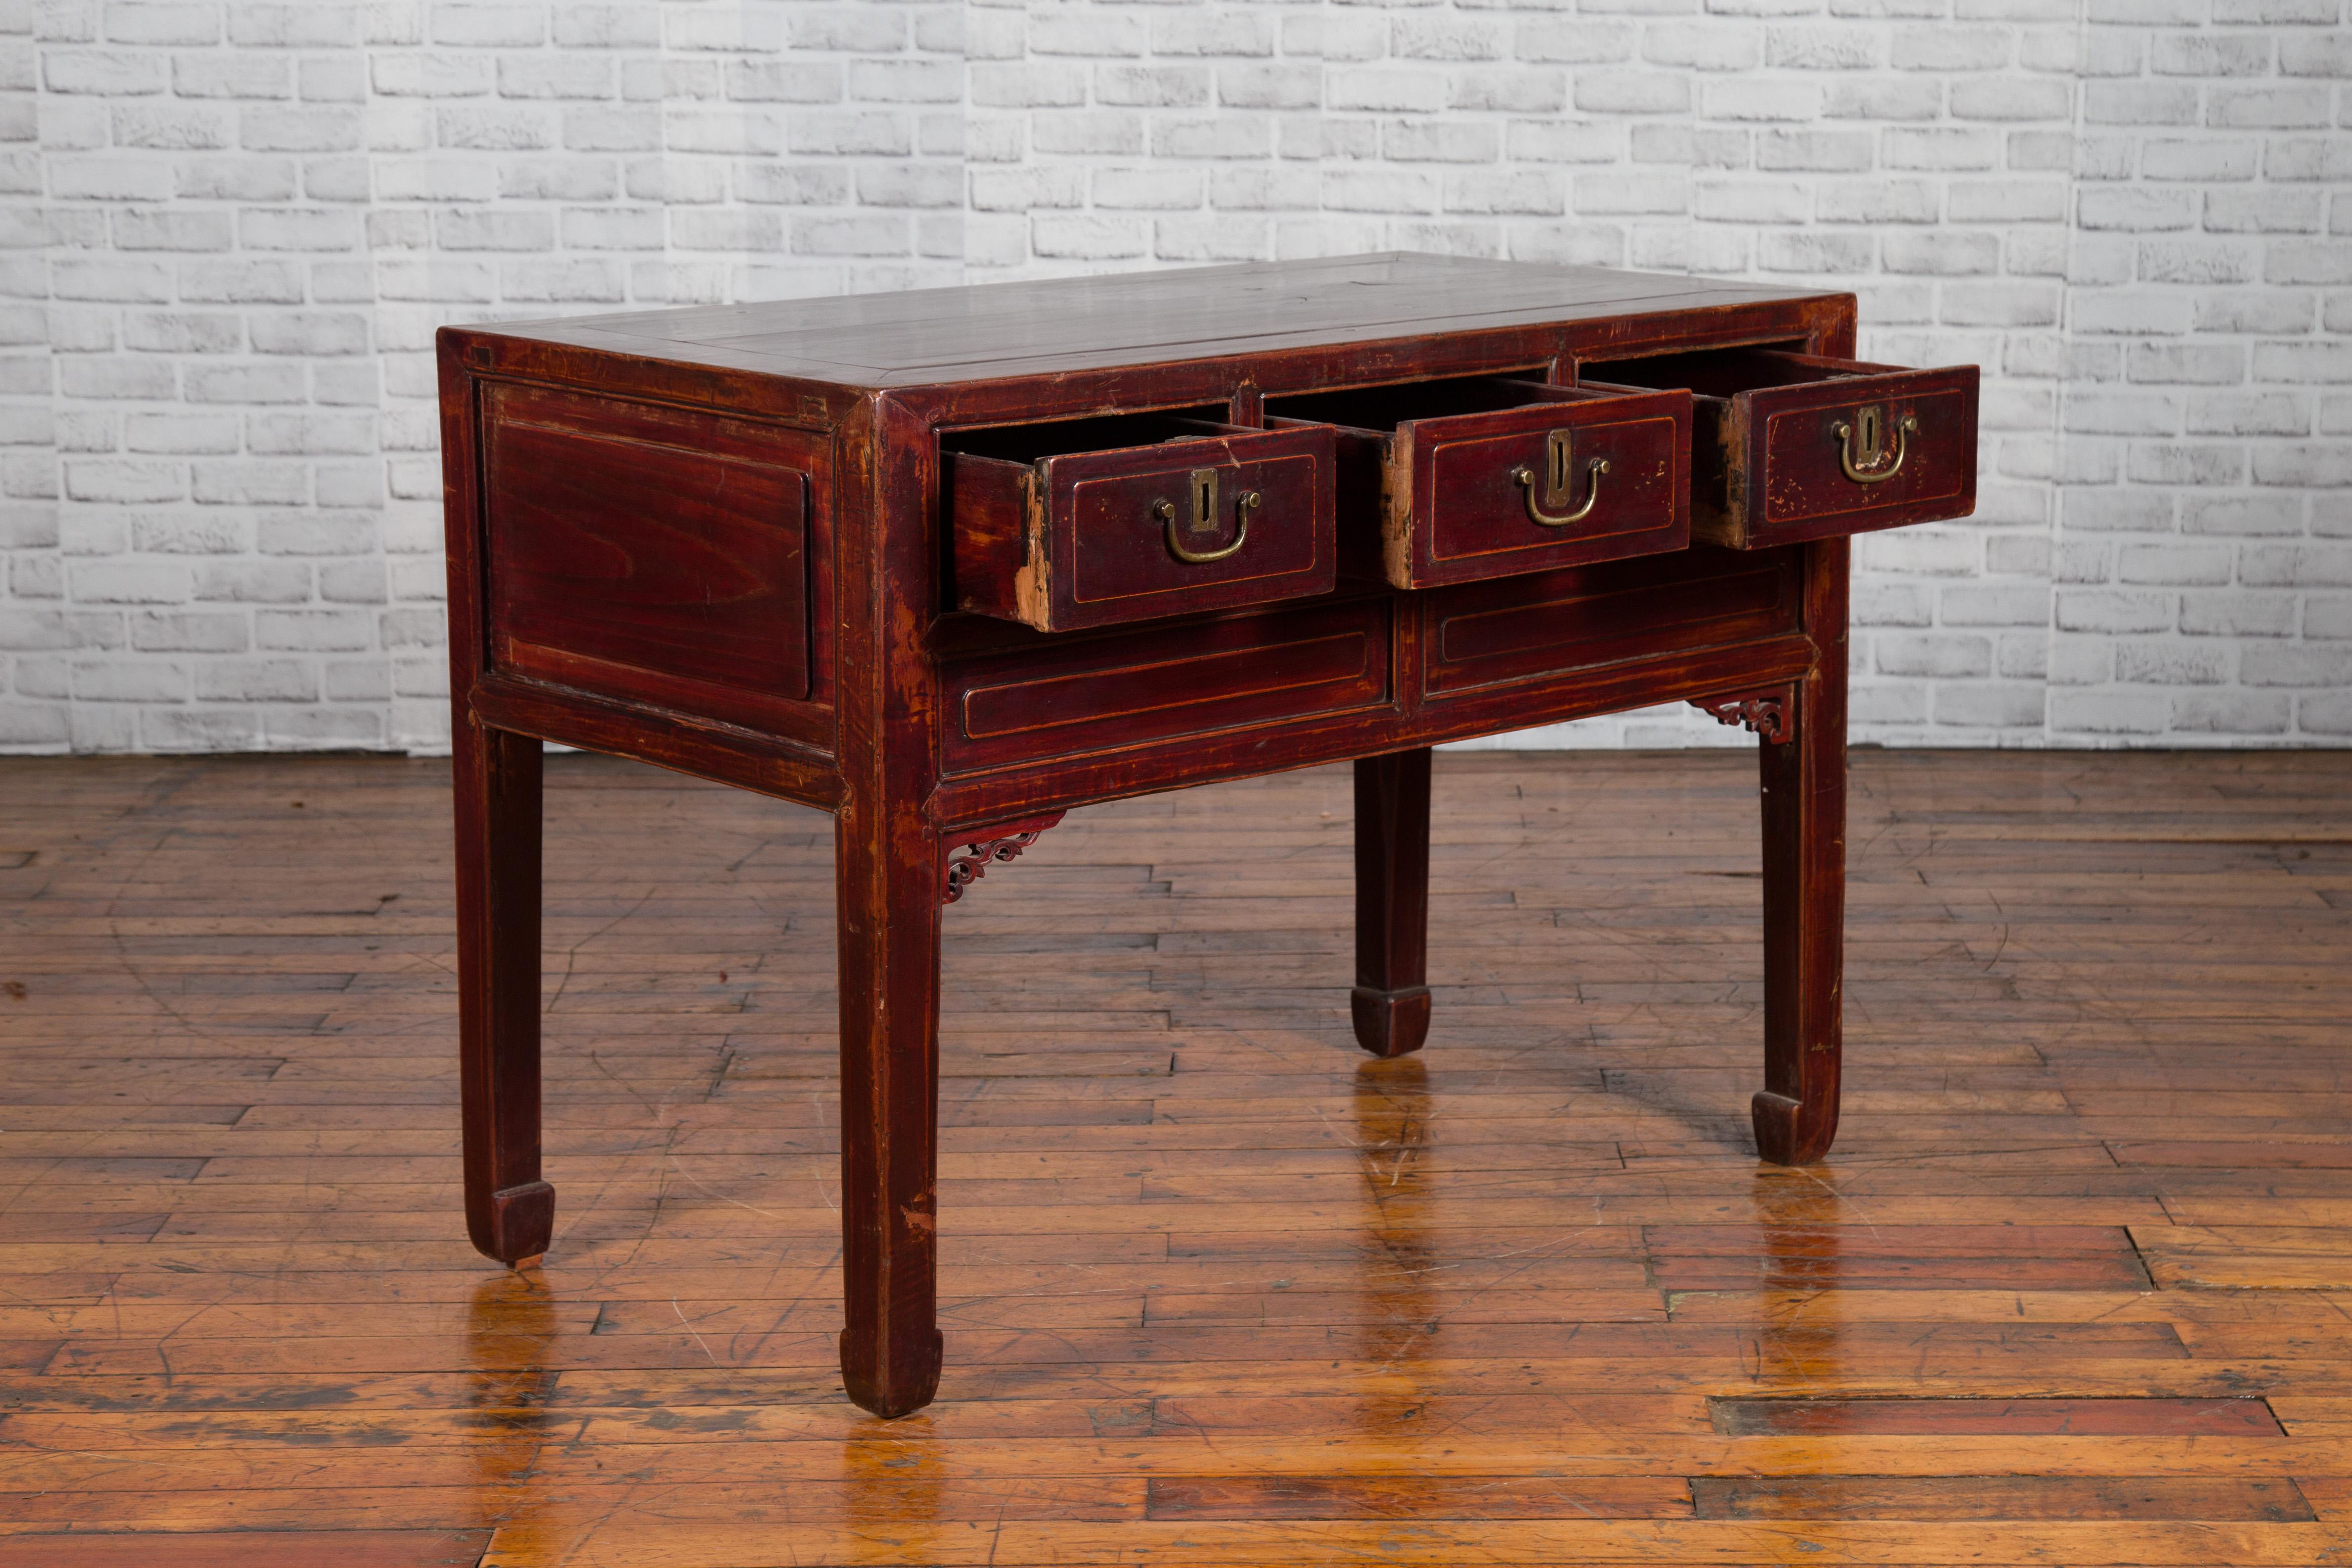 Chinese Antique Console Table with Drawers, Horse Hoof Legs and Dark Red Patina For Sale 3